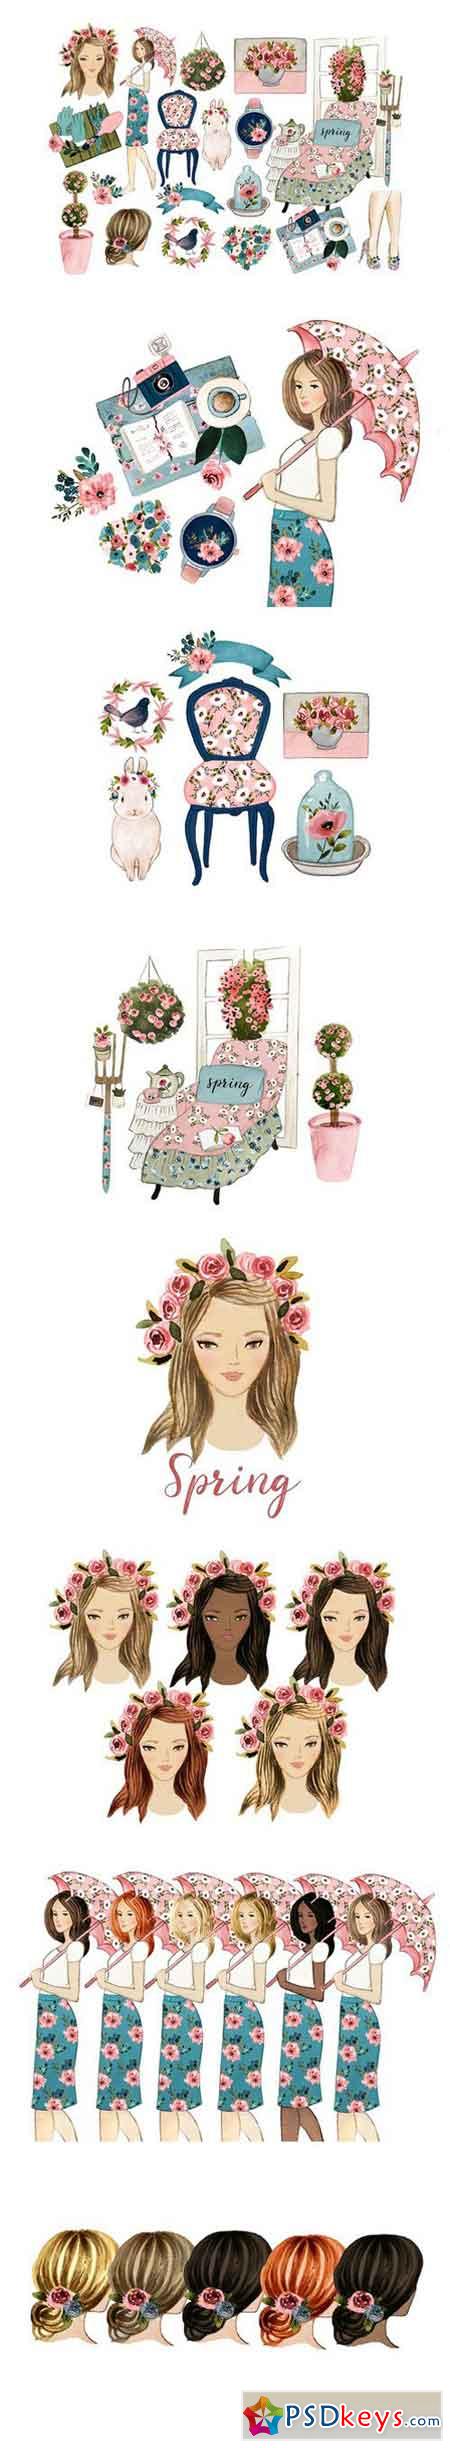 Spring clipart 2301216